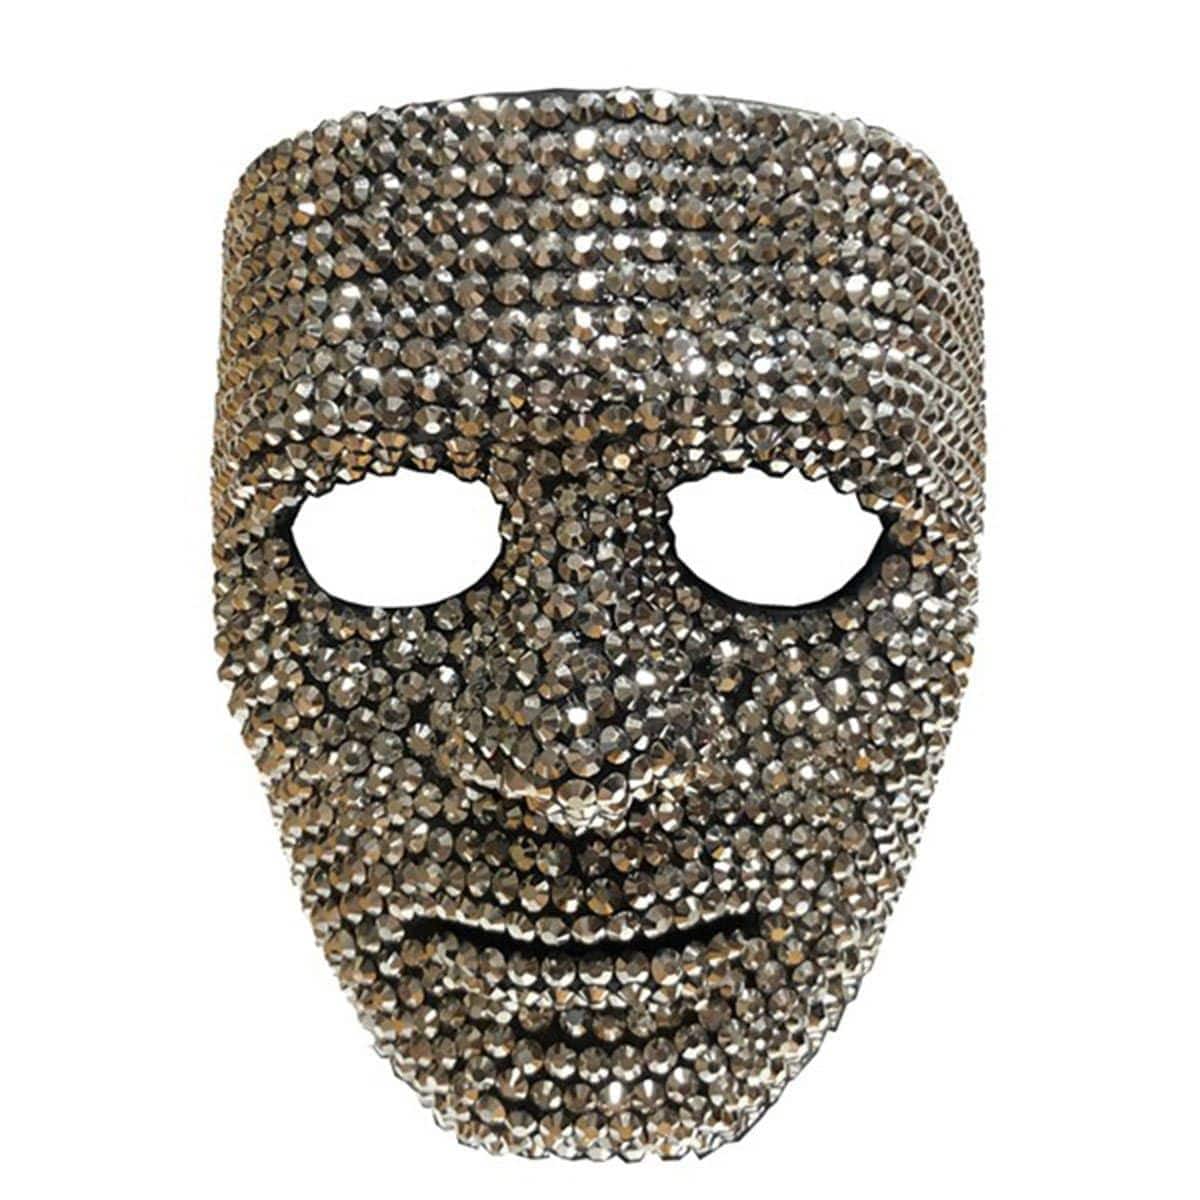 Buy Costume Accessories Silver Rhinestone Mask sold at Party Expert